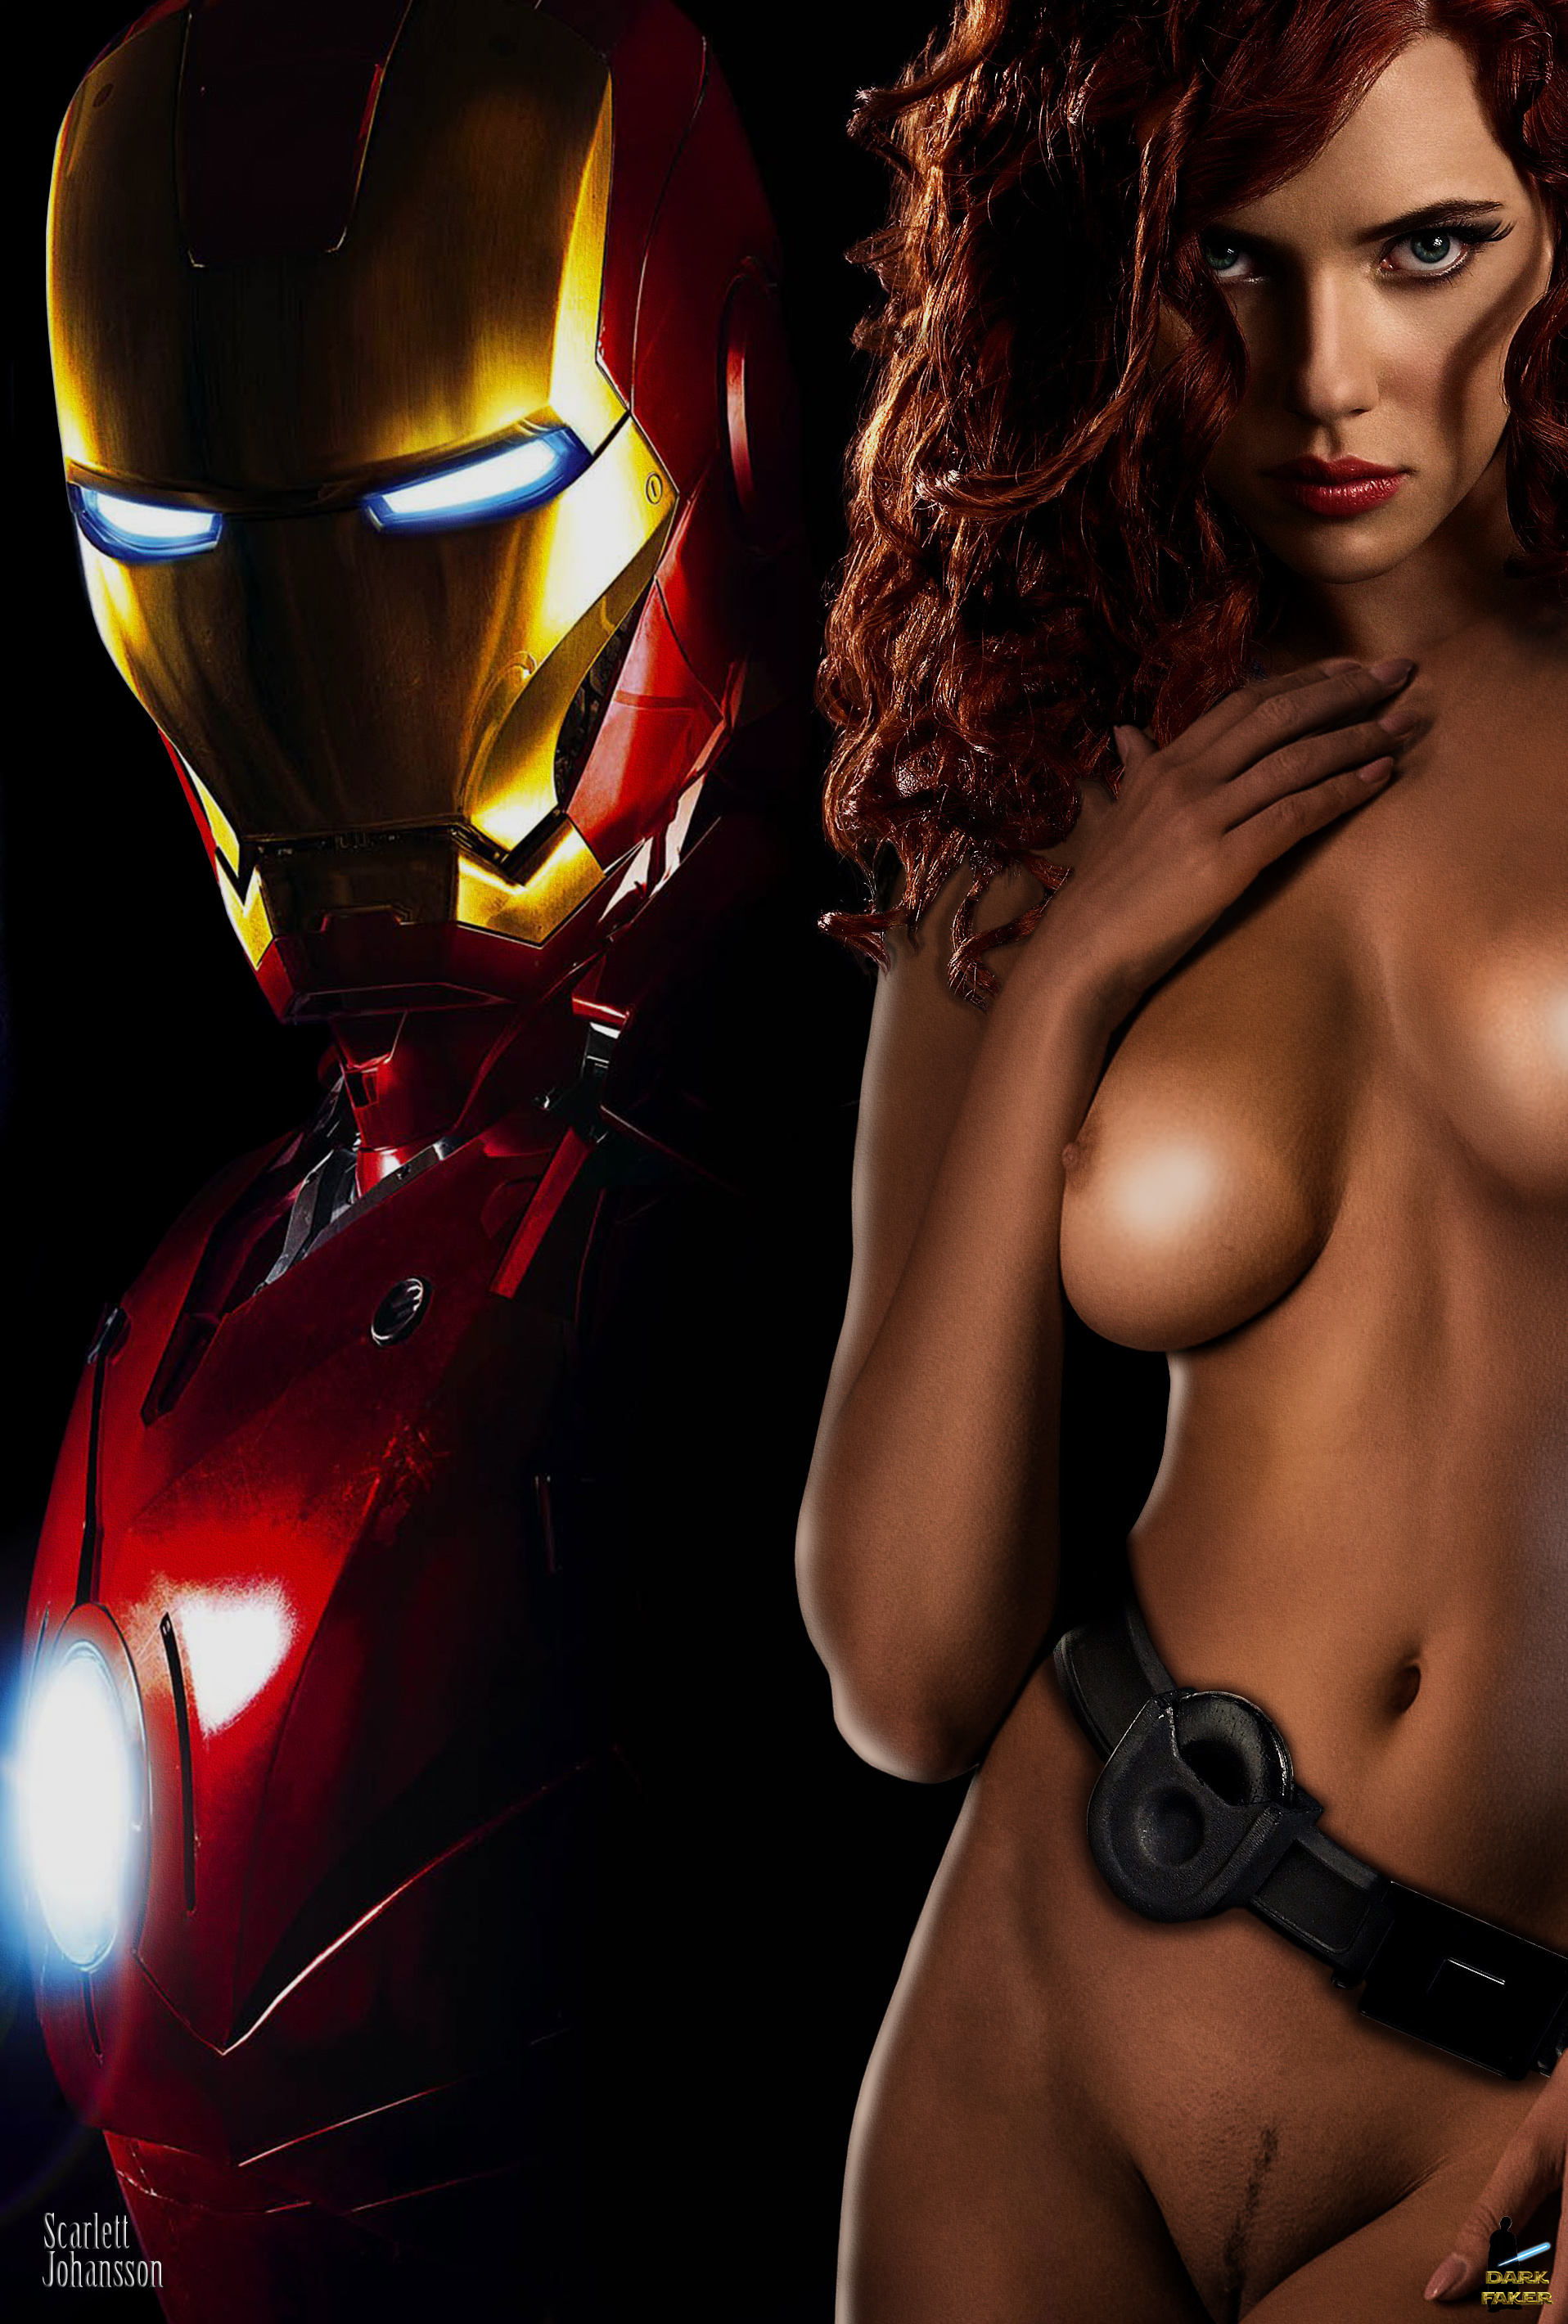 The Avengers Fake Porn - Marvel Movie Rule 34 Collection â€“ Nerd Porn!